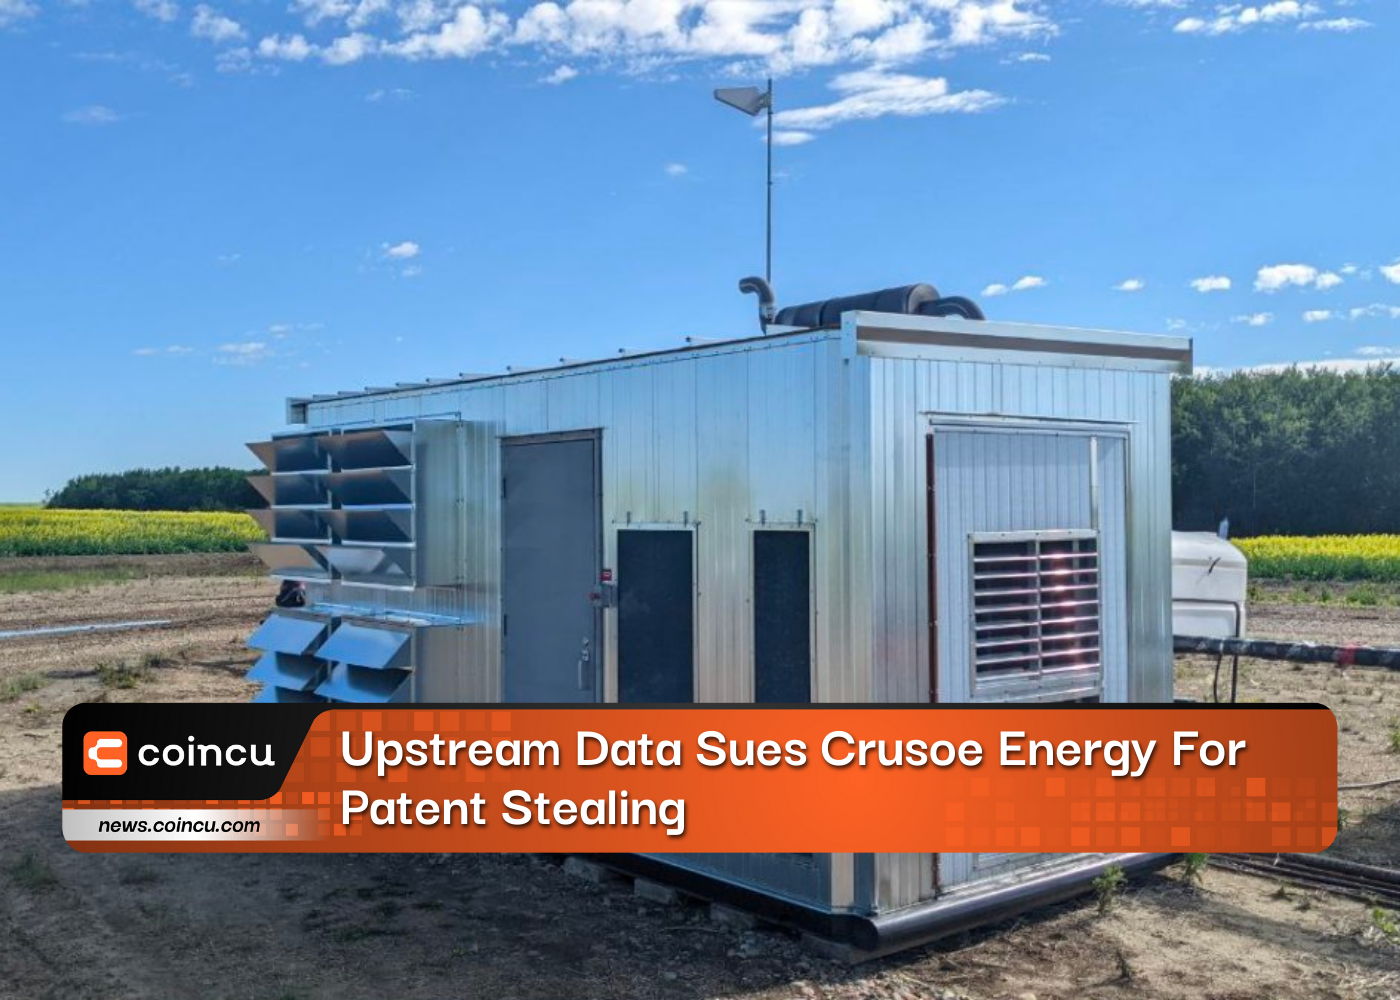 Upstream Data Sues Crusoe Energy For Patent Stealing